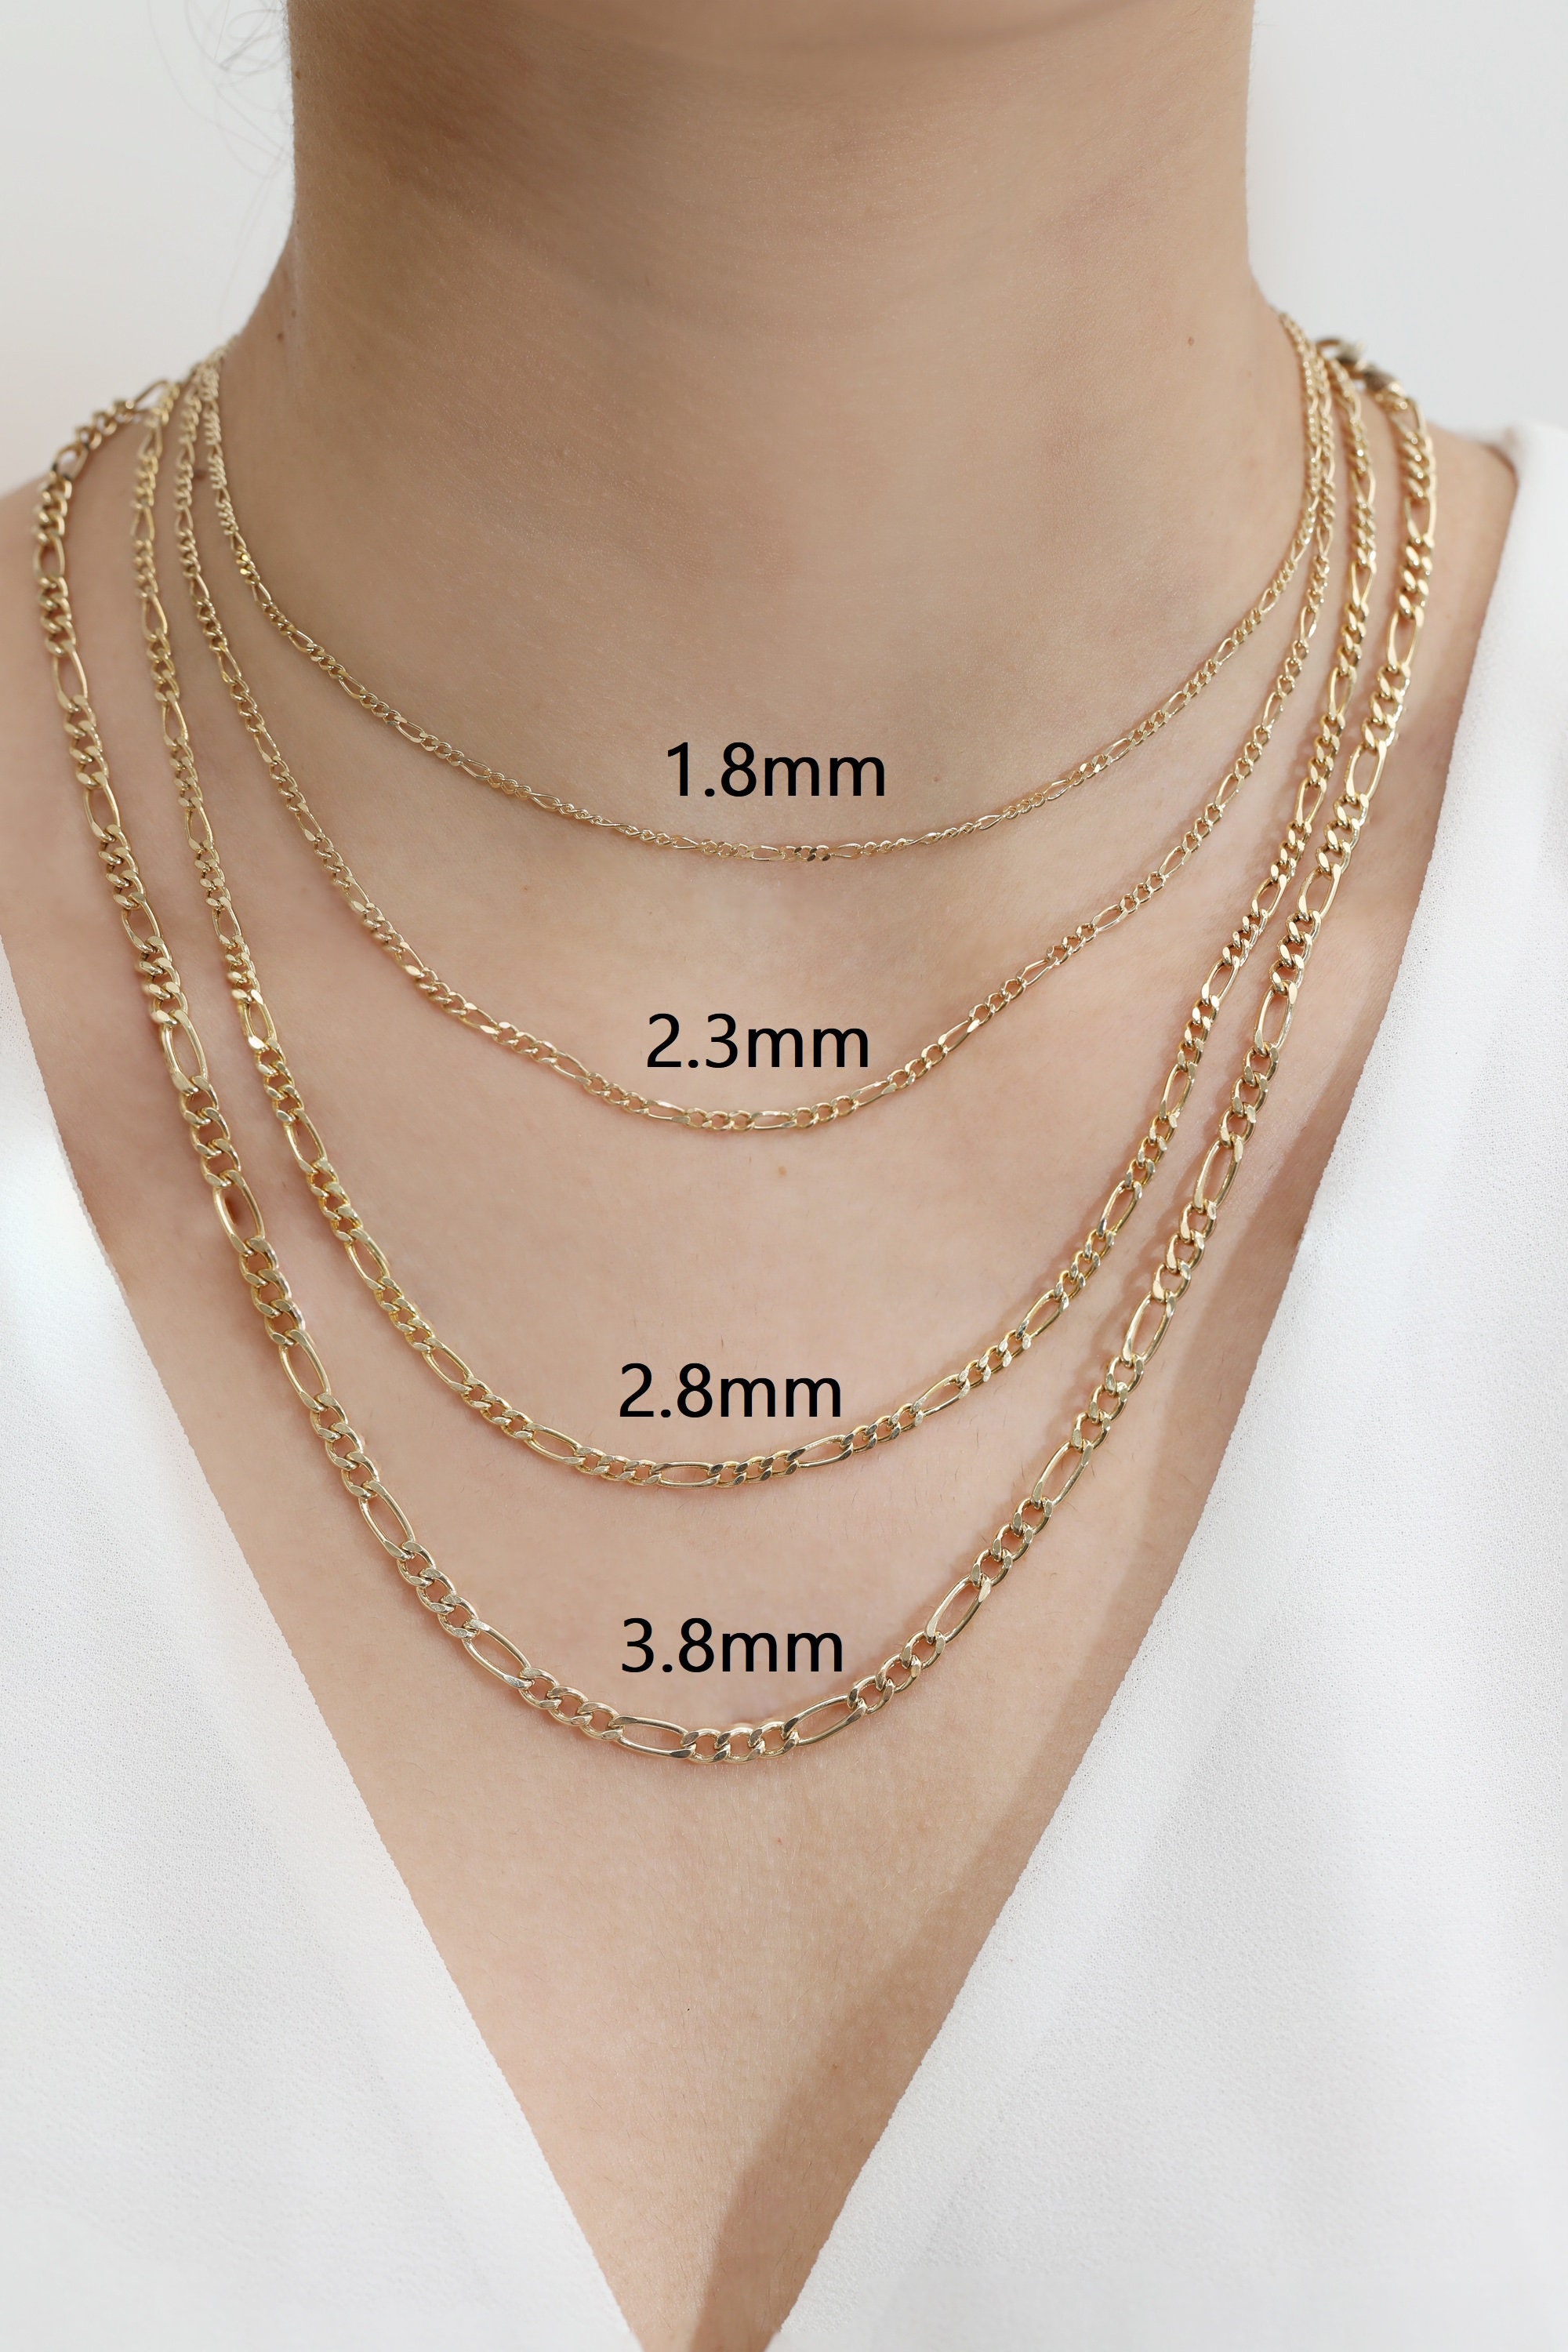 Real 10K Yellow Gold 2.5mm Diamond Cut Rope Chain Pendant Necklace 16